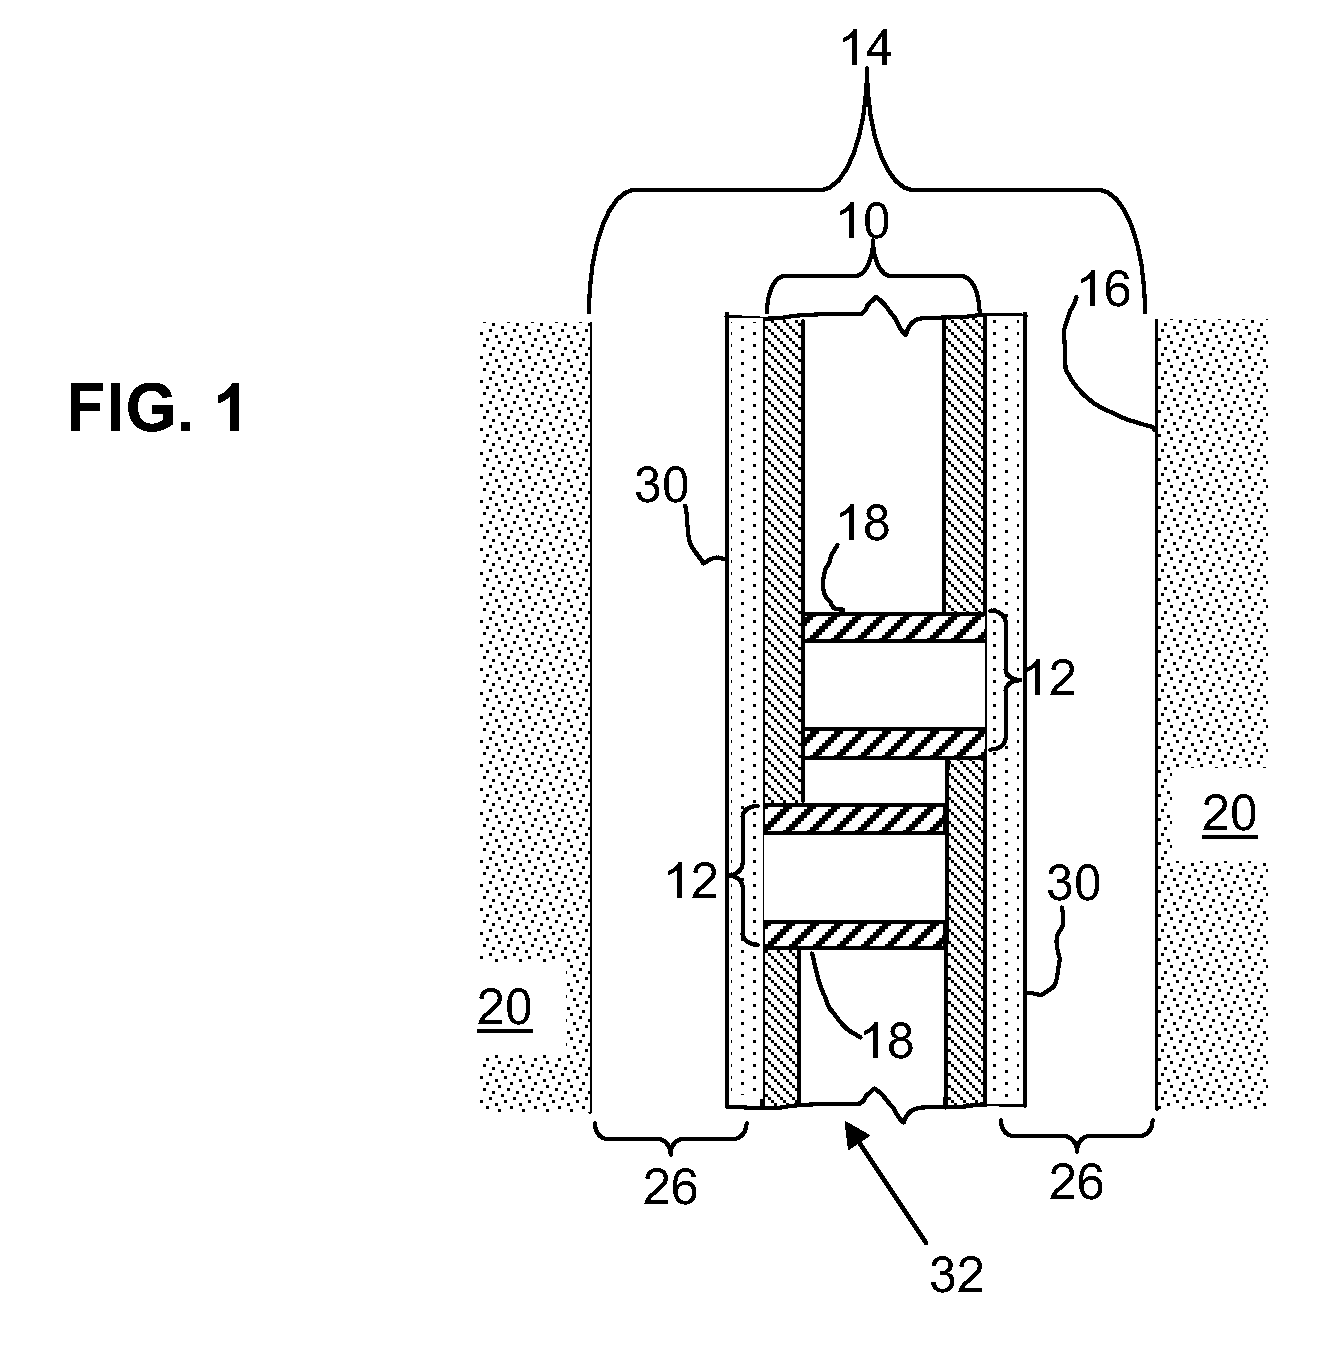 Method for providing a temporary barrier in a flow pathway